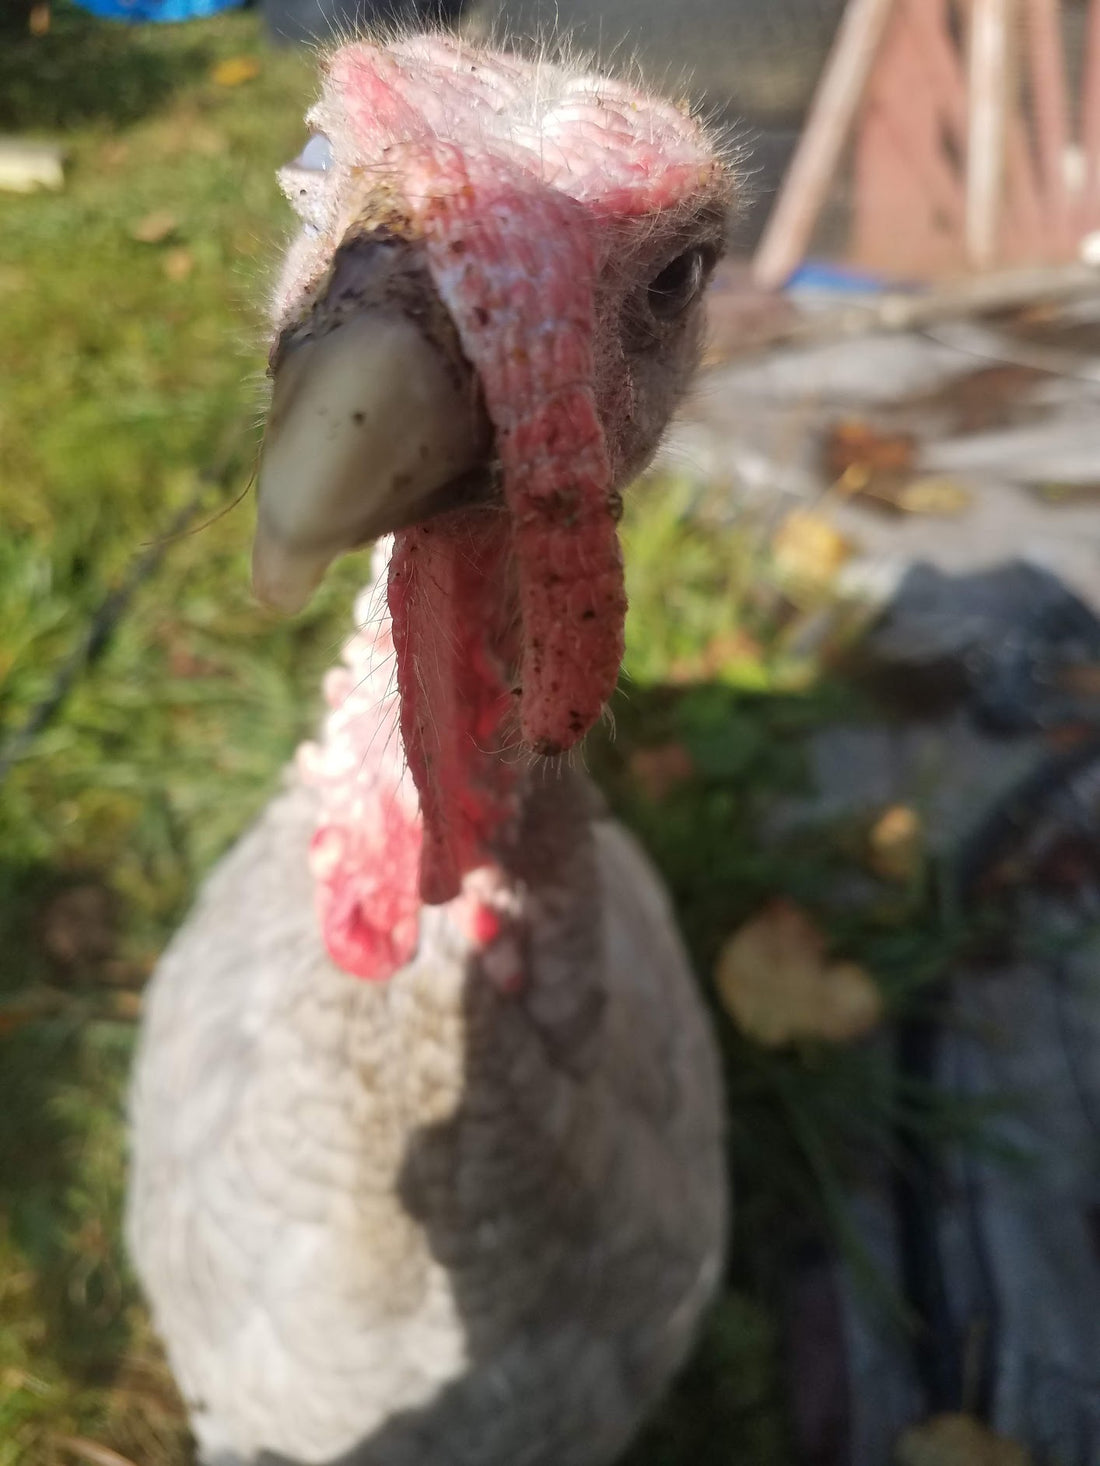 So you're thinking about getting turkeys... Ha!